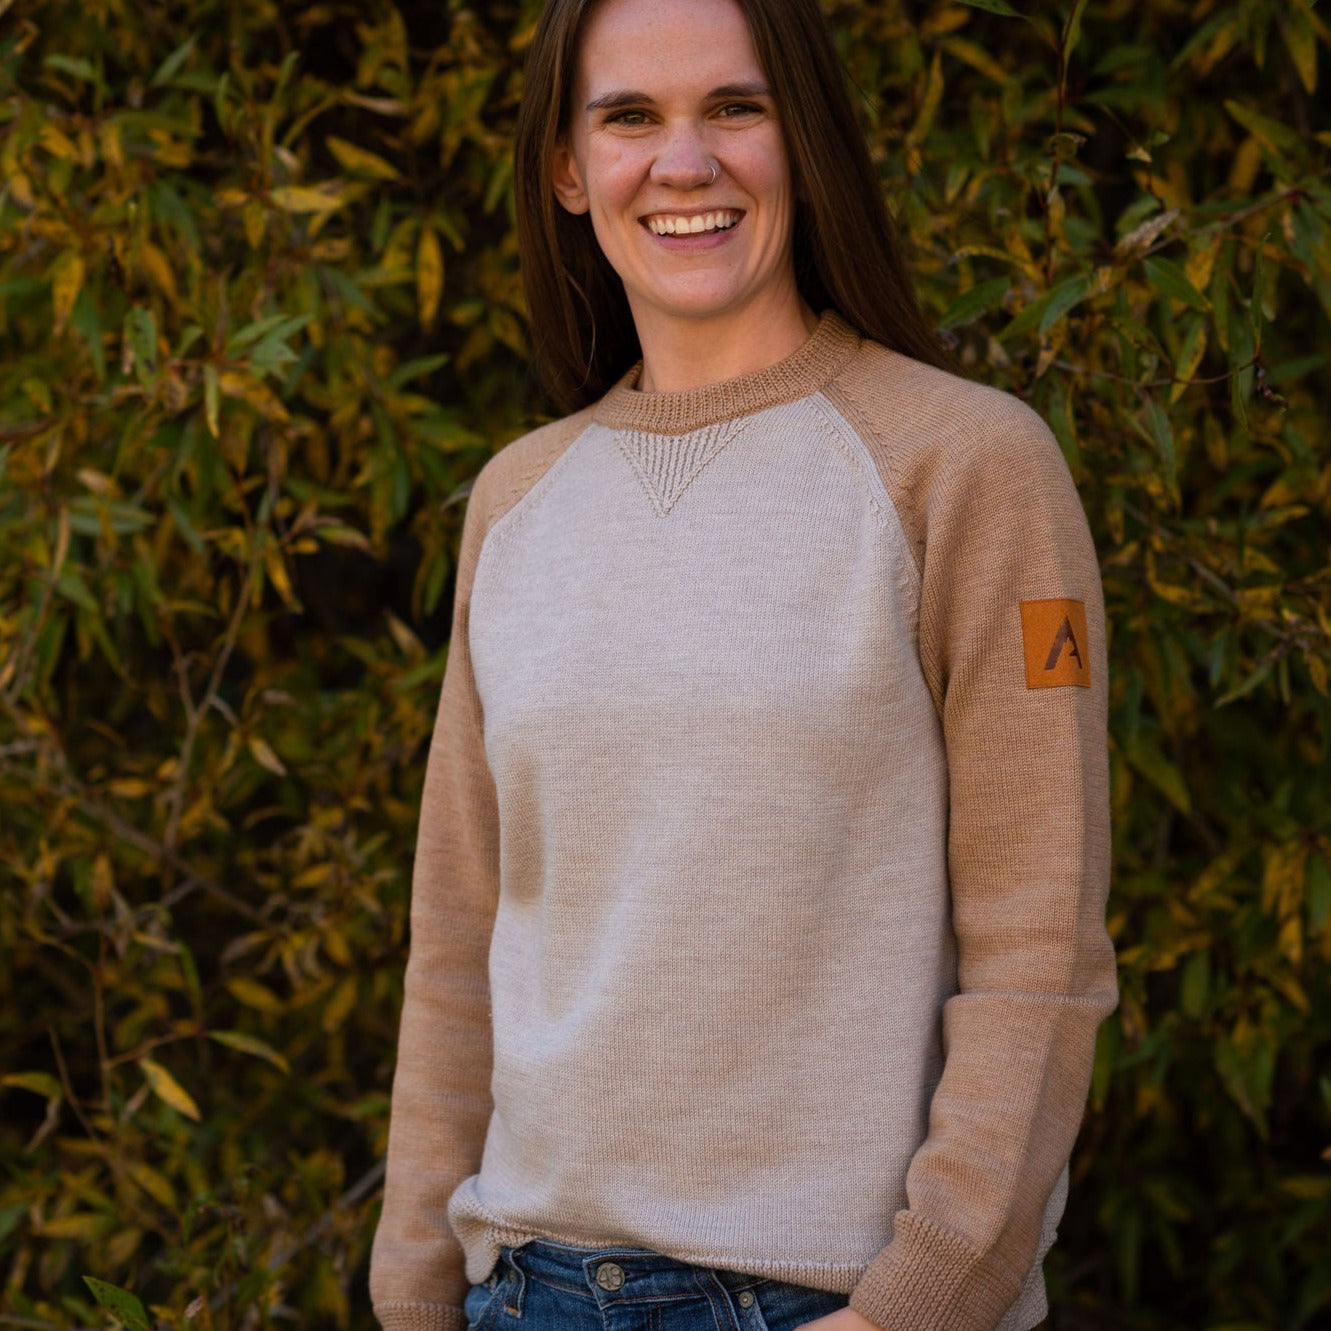 A comfortable classic in soft merino wool.  Knitted in the United States with fine Italian merino wool yarn.  The Colorado Sweater is sized unisex     Details  Made in the United States  100% merino wool  Classic fit / high crew neck  Contrast color raglan sleeve  2 colors:  sand/tan, olive/taupe  Unisex sizing